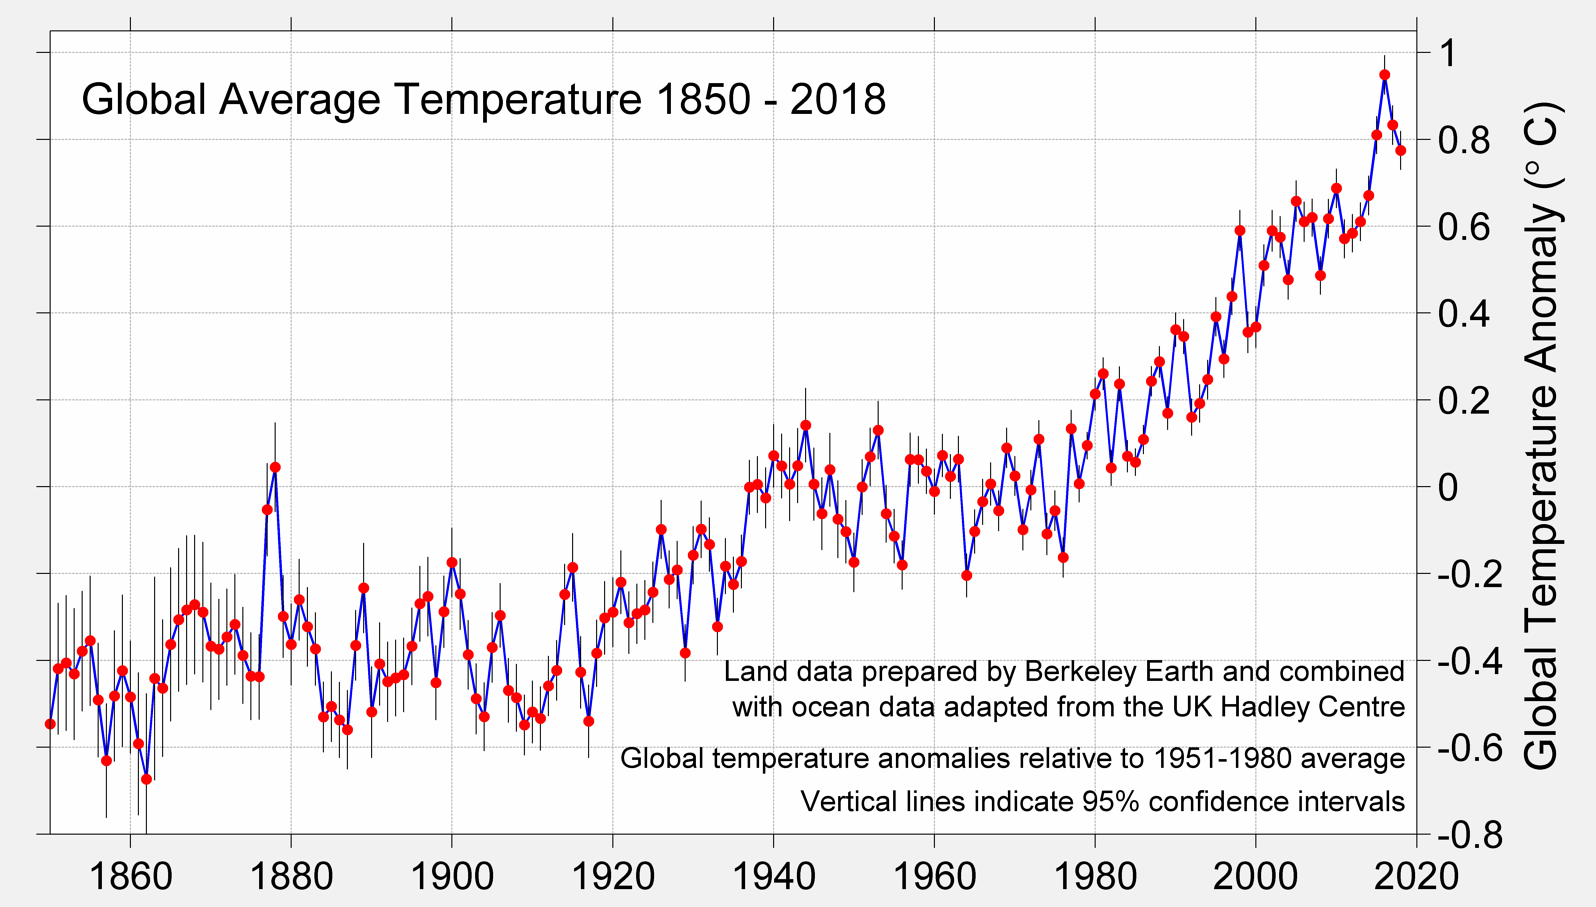 Global Mean Temperature Anomaly 1850-2018